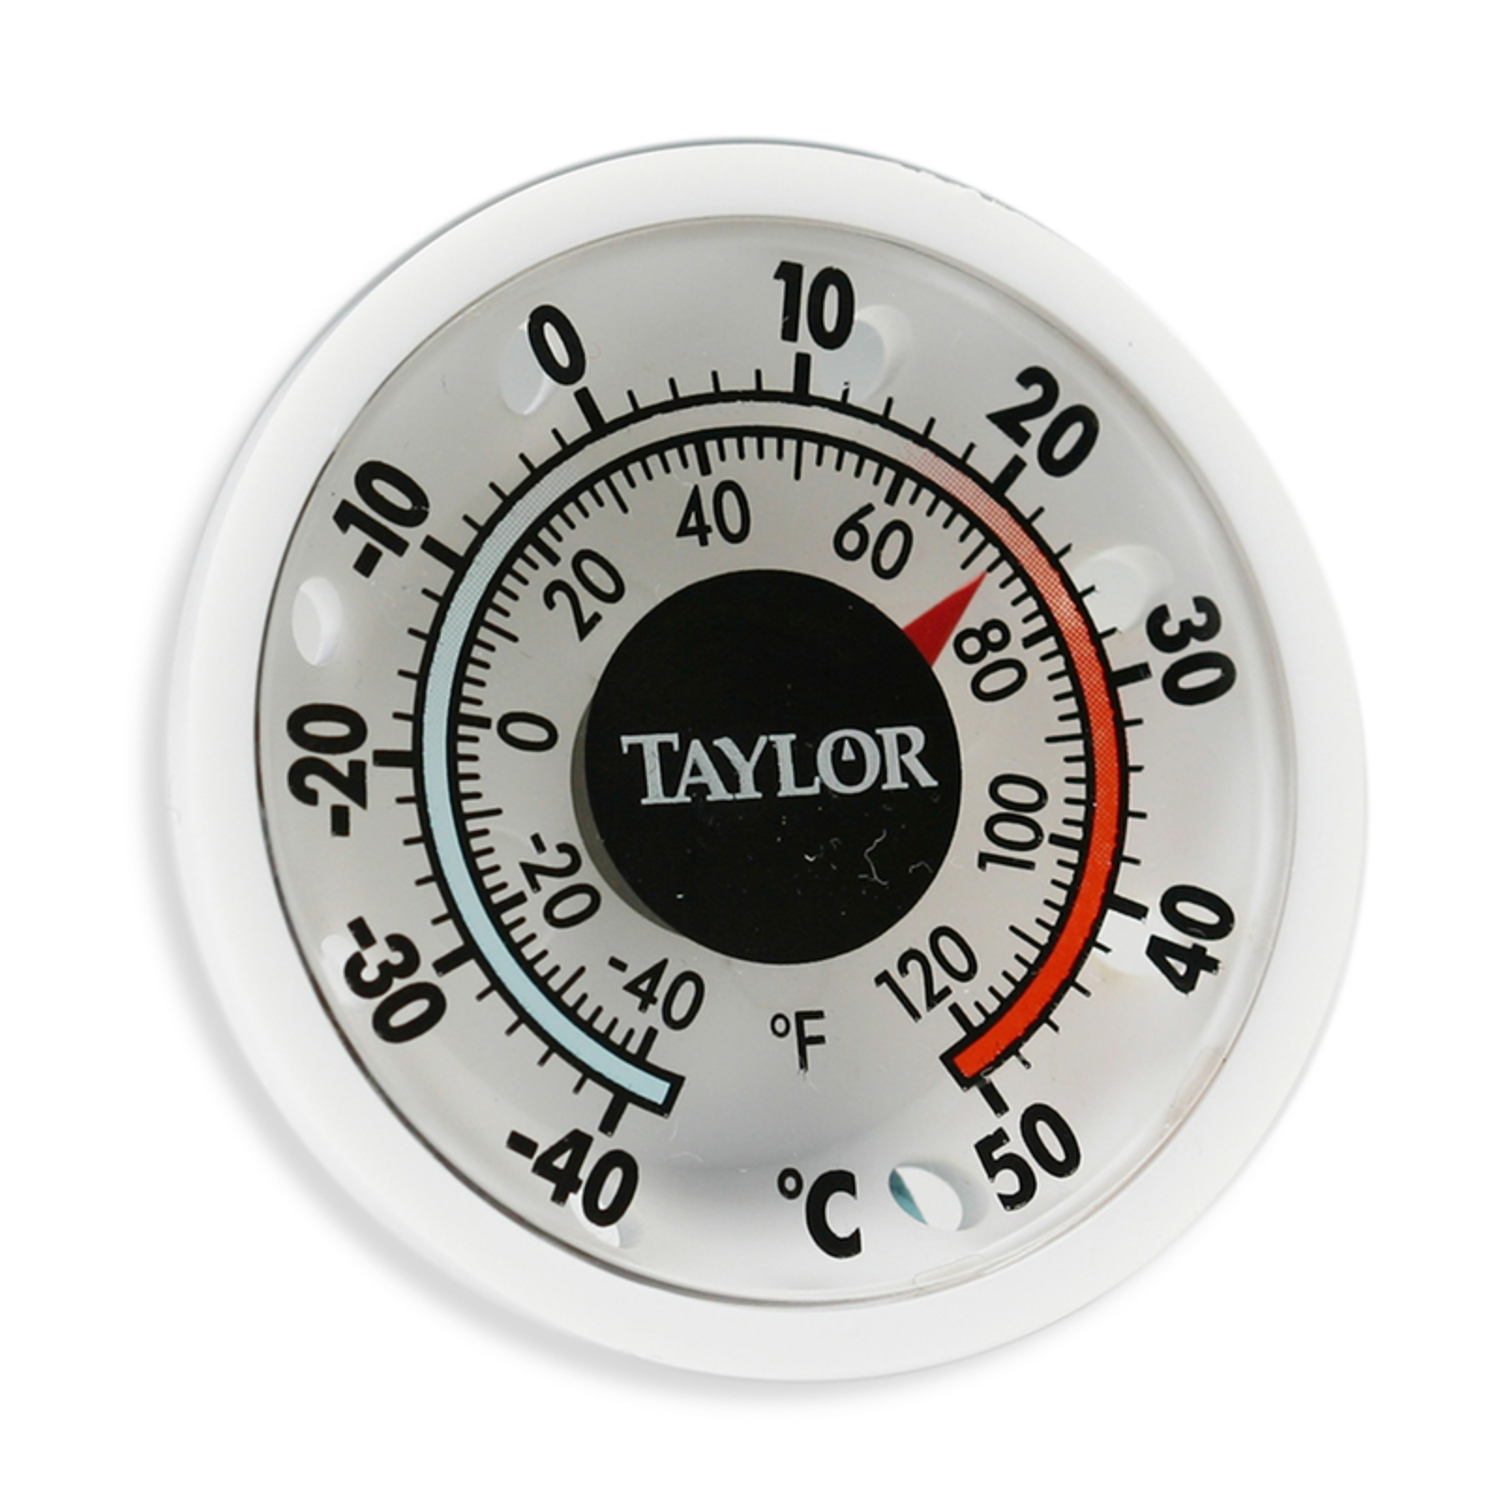 Taylor Instant Read Digital Freezer/Refrigerator Thermometer - Ace Hardware